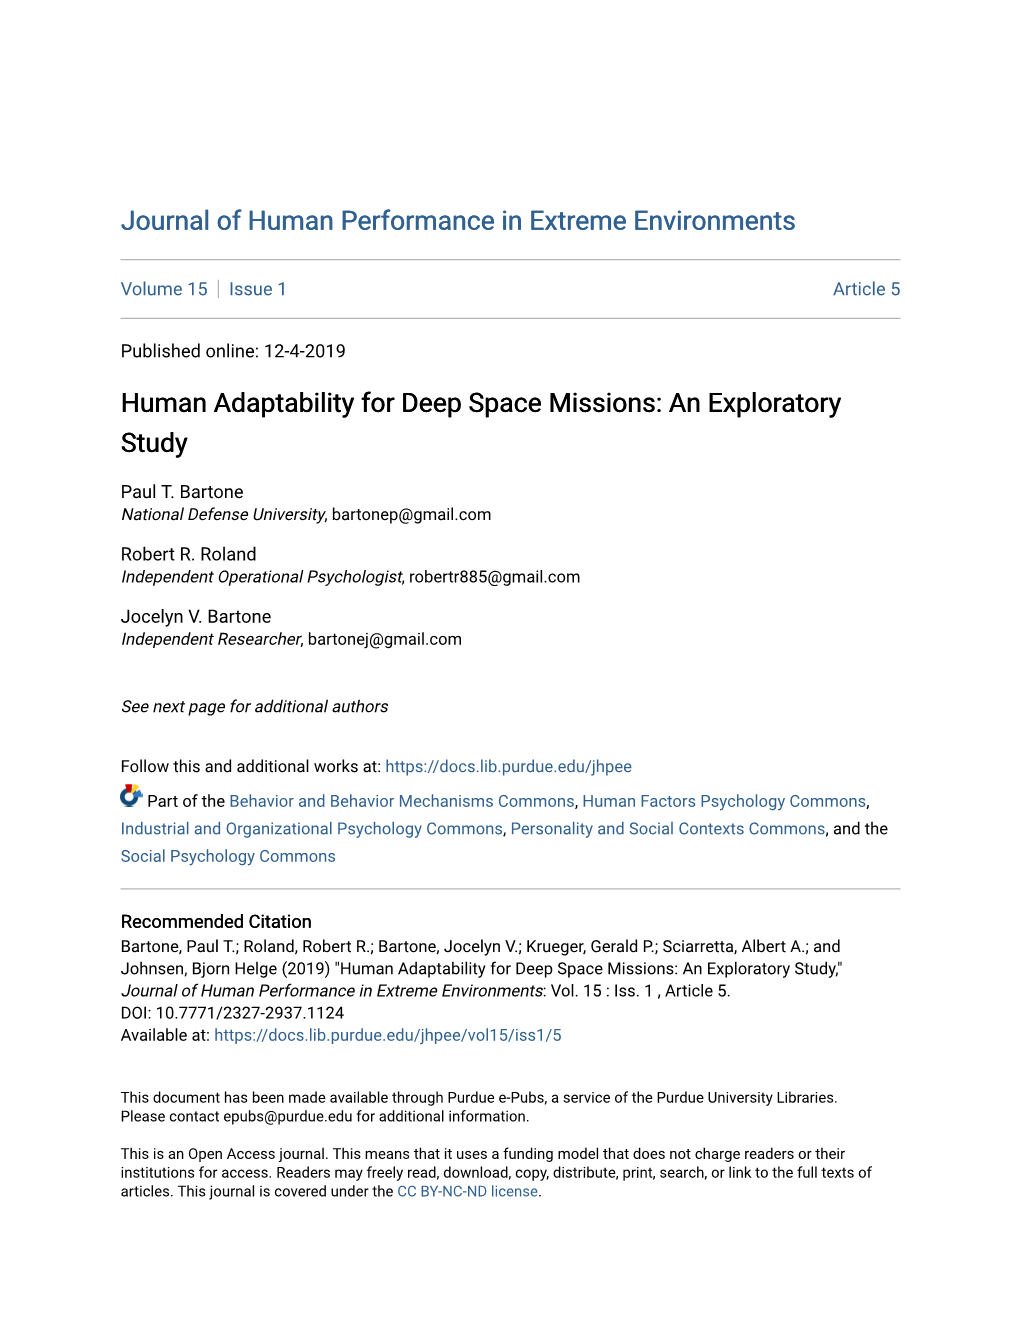 Human Adaptability for Deep Space Missions: an Exploratory Study